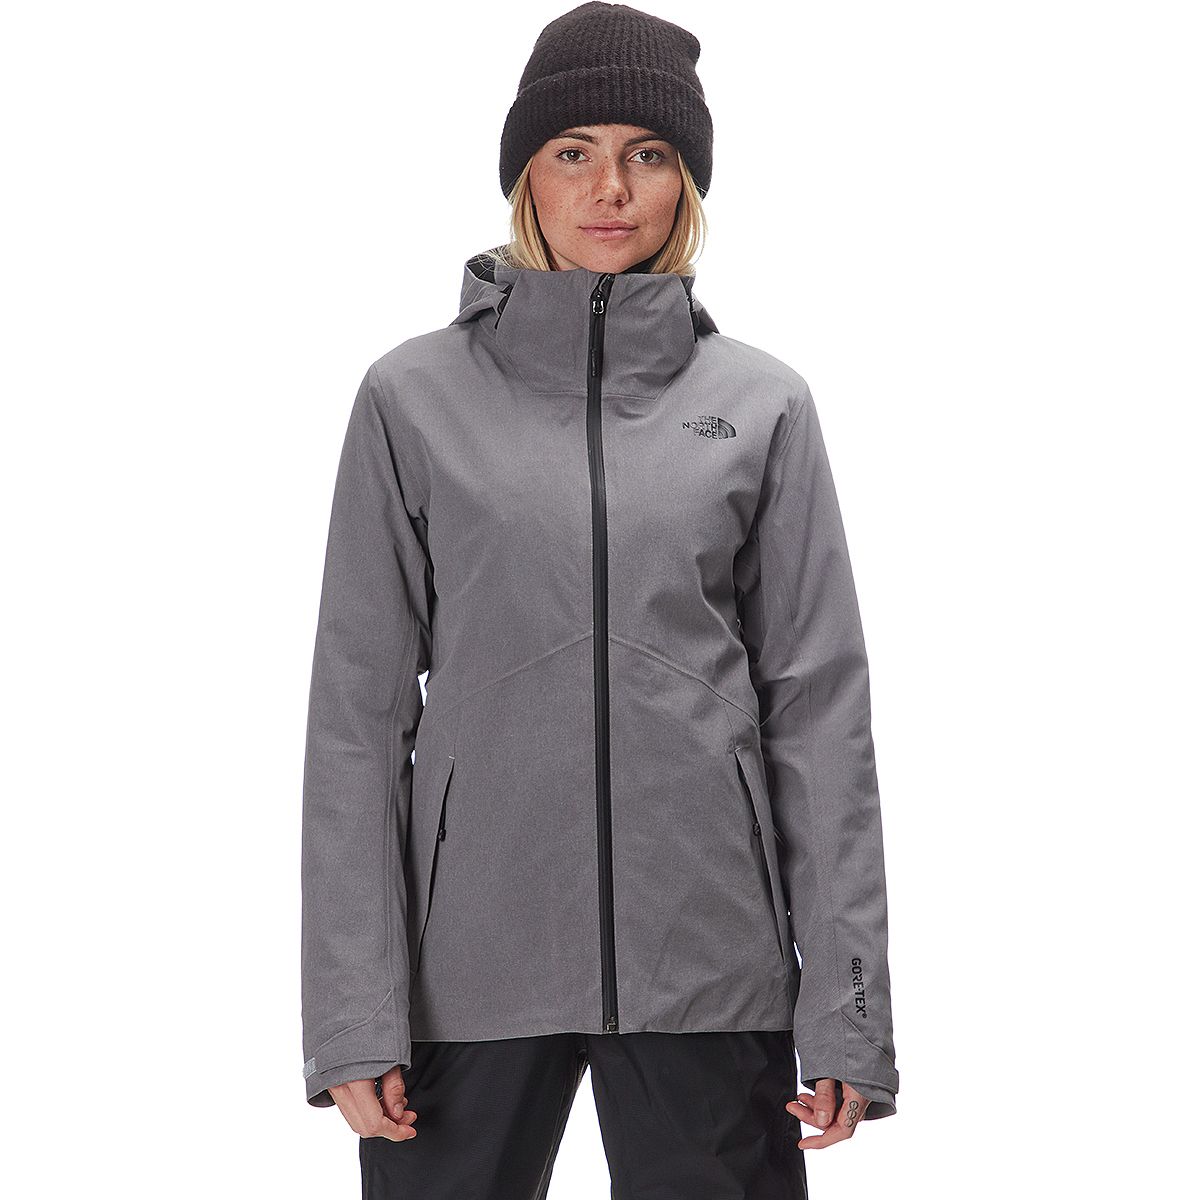 The North Face Apex Flex GTX Thermal Jacket - Women's | Backcountry.com